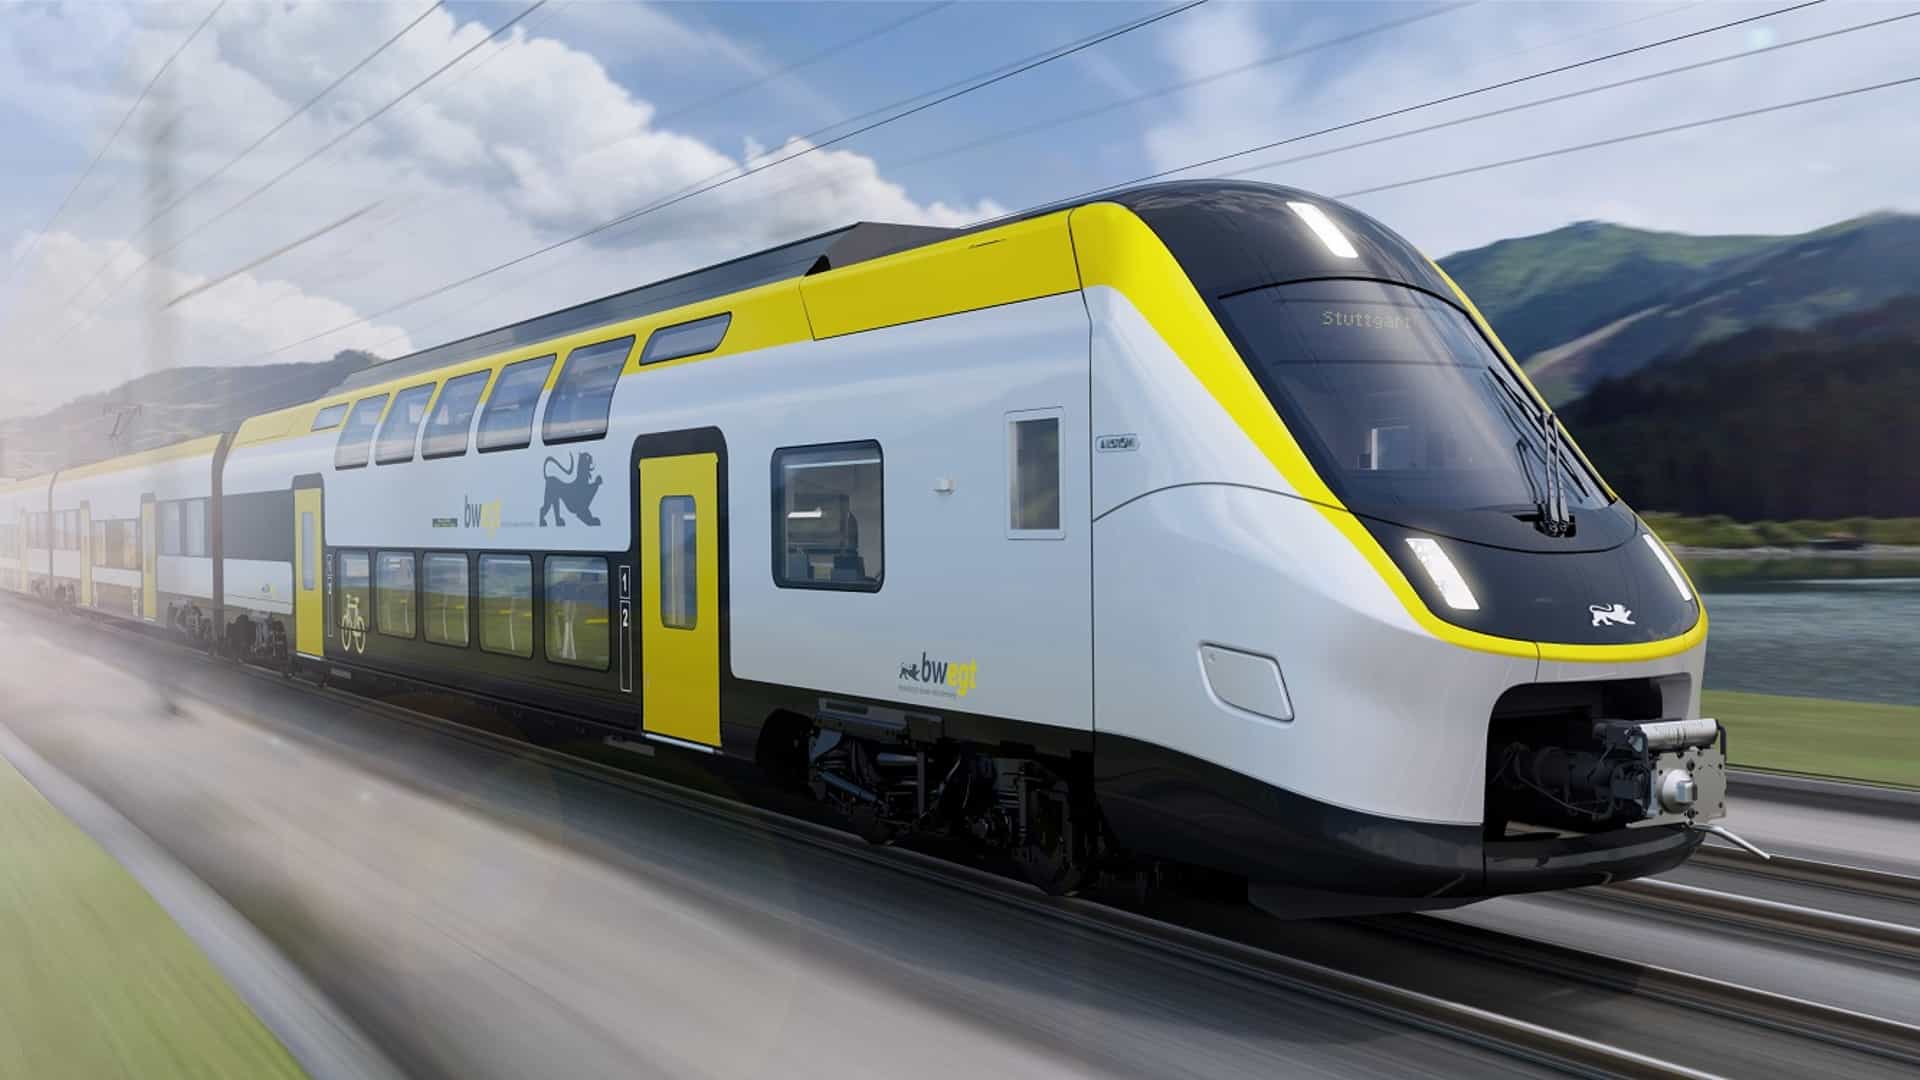 Alstom has commissioned Knorr-Bremse to the Coradia Stream family with multiple systems